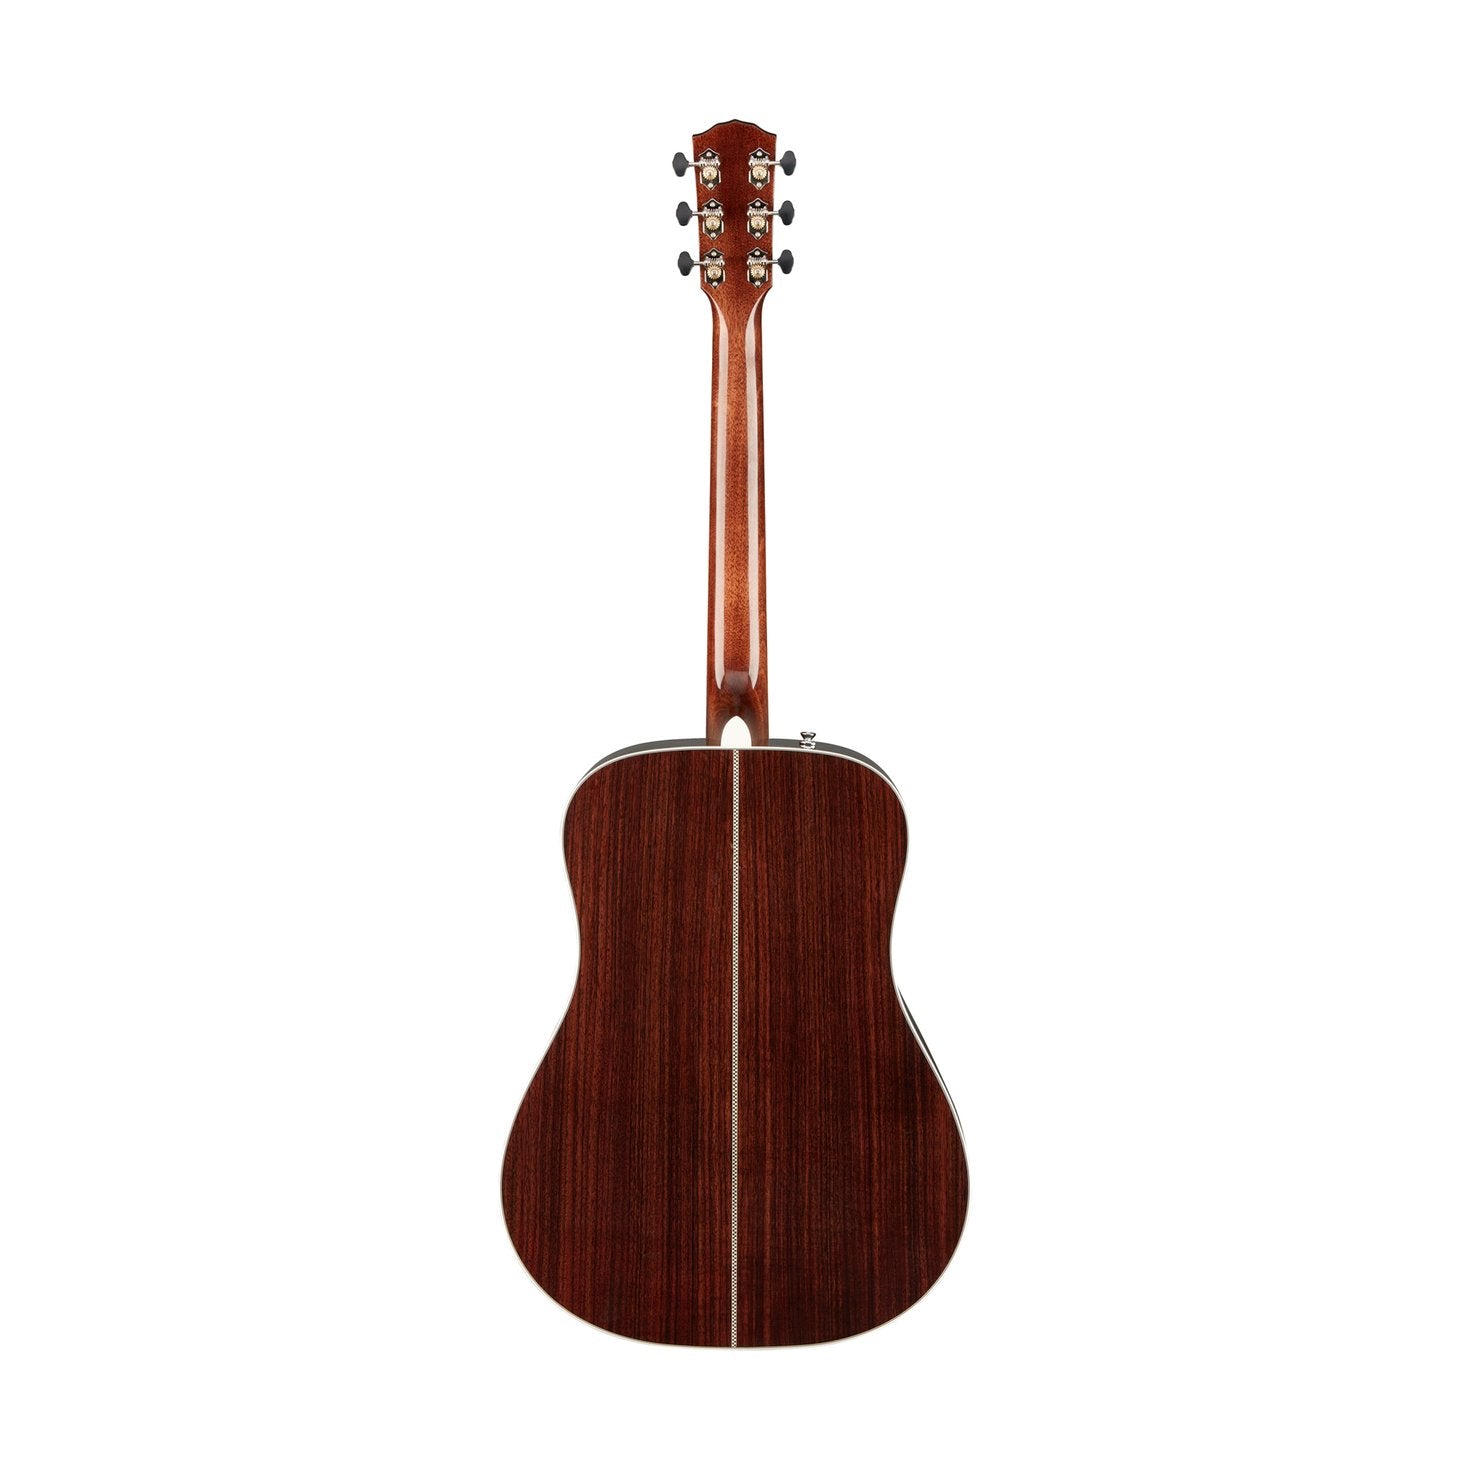 Fender PM-1 Limited Adirondack Dreadnought Acoustic Guitar w/Case, Rosewood, FENDER, ACOUSTIC GUITAR, fender-acoustic-guitar-f03-096-0294-221, ZOSO MUSIC SDN BHD